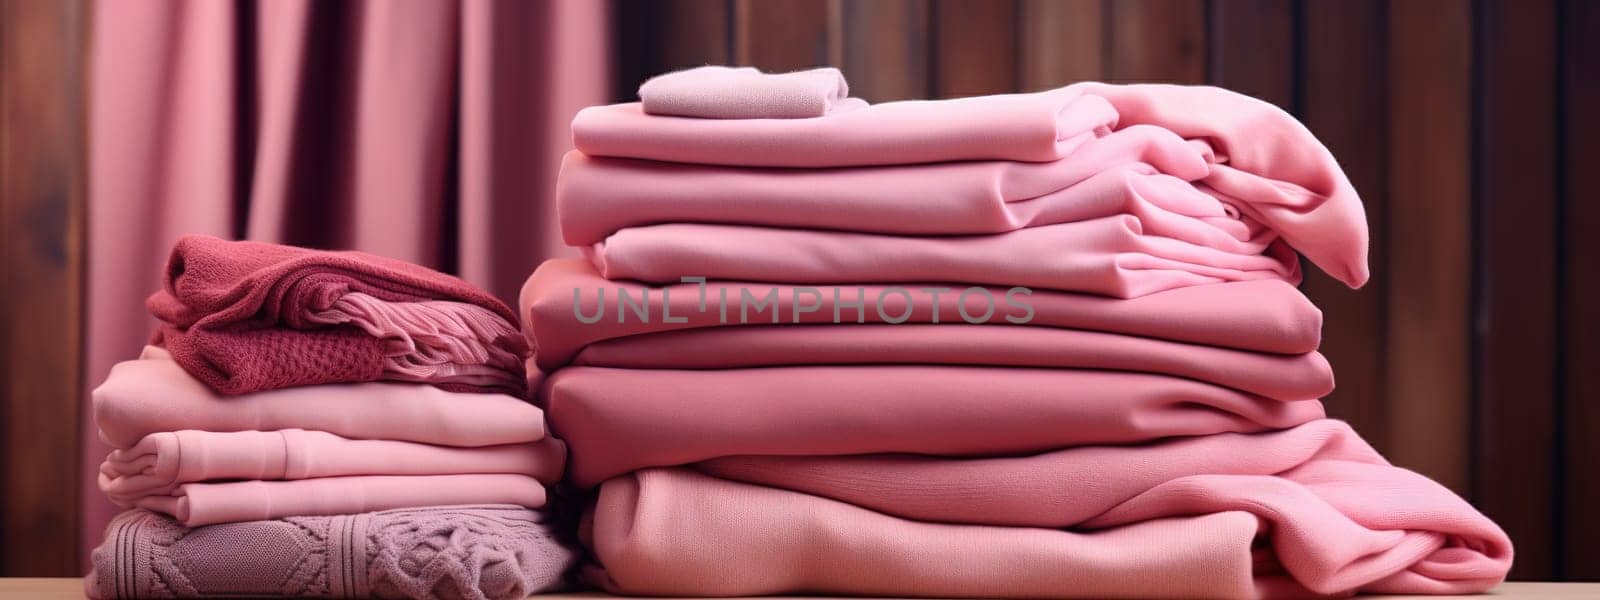 large stacks of peach colored clothes on a delicate background in designer clothing store, trendy peach by KaterinaDalemans